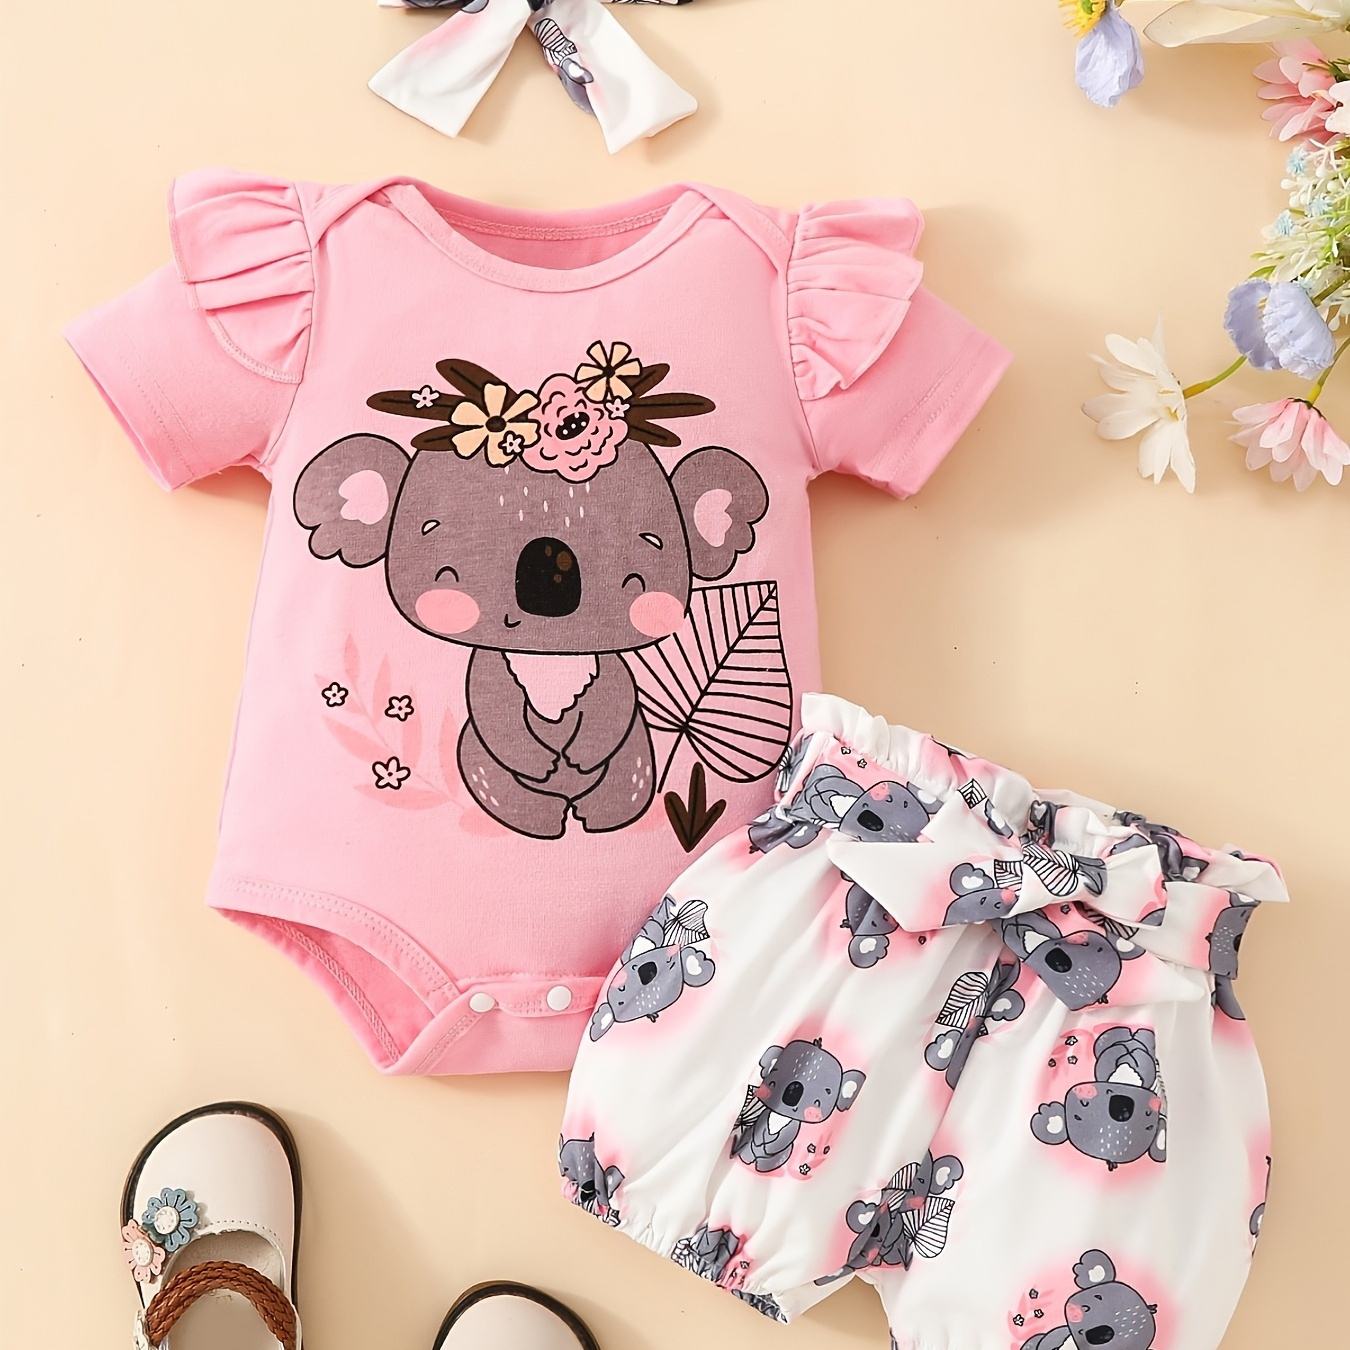 

Cute Baby Girls Cartoon Koala Print Ruffle Short Sleeve Triangle Romper Climbing Suit + Shorts With Headband Set, Summer Baby Girl Short Sleeve Top Shorts Comfy Wear Clothes, Best Cute Gift For Baby